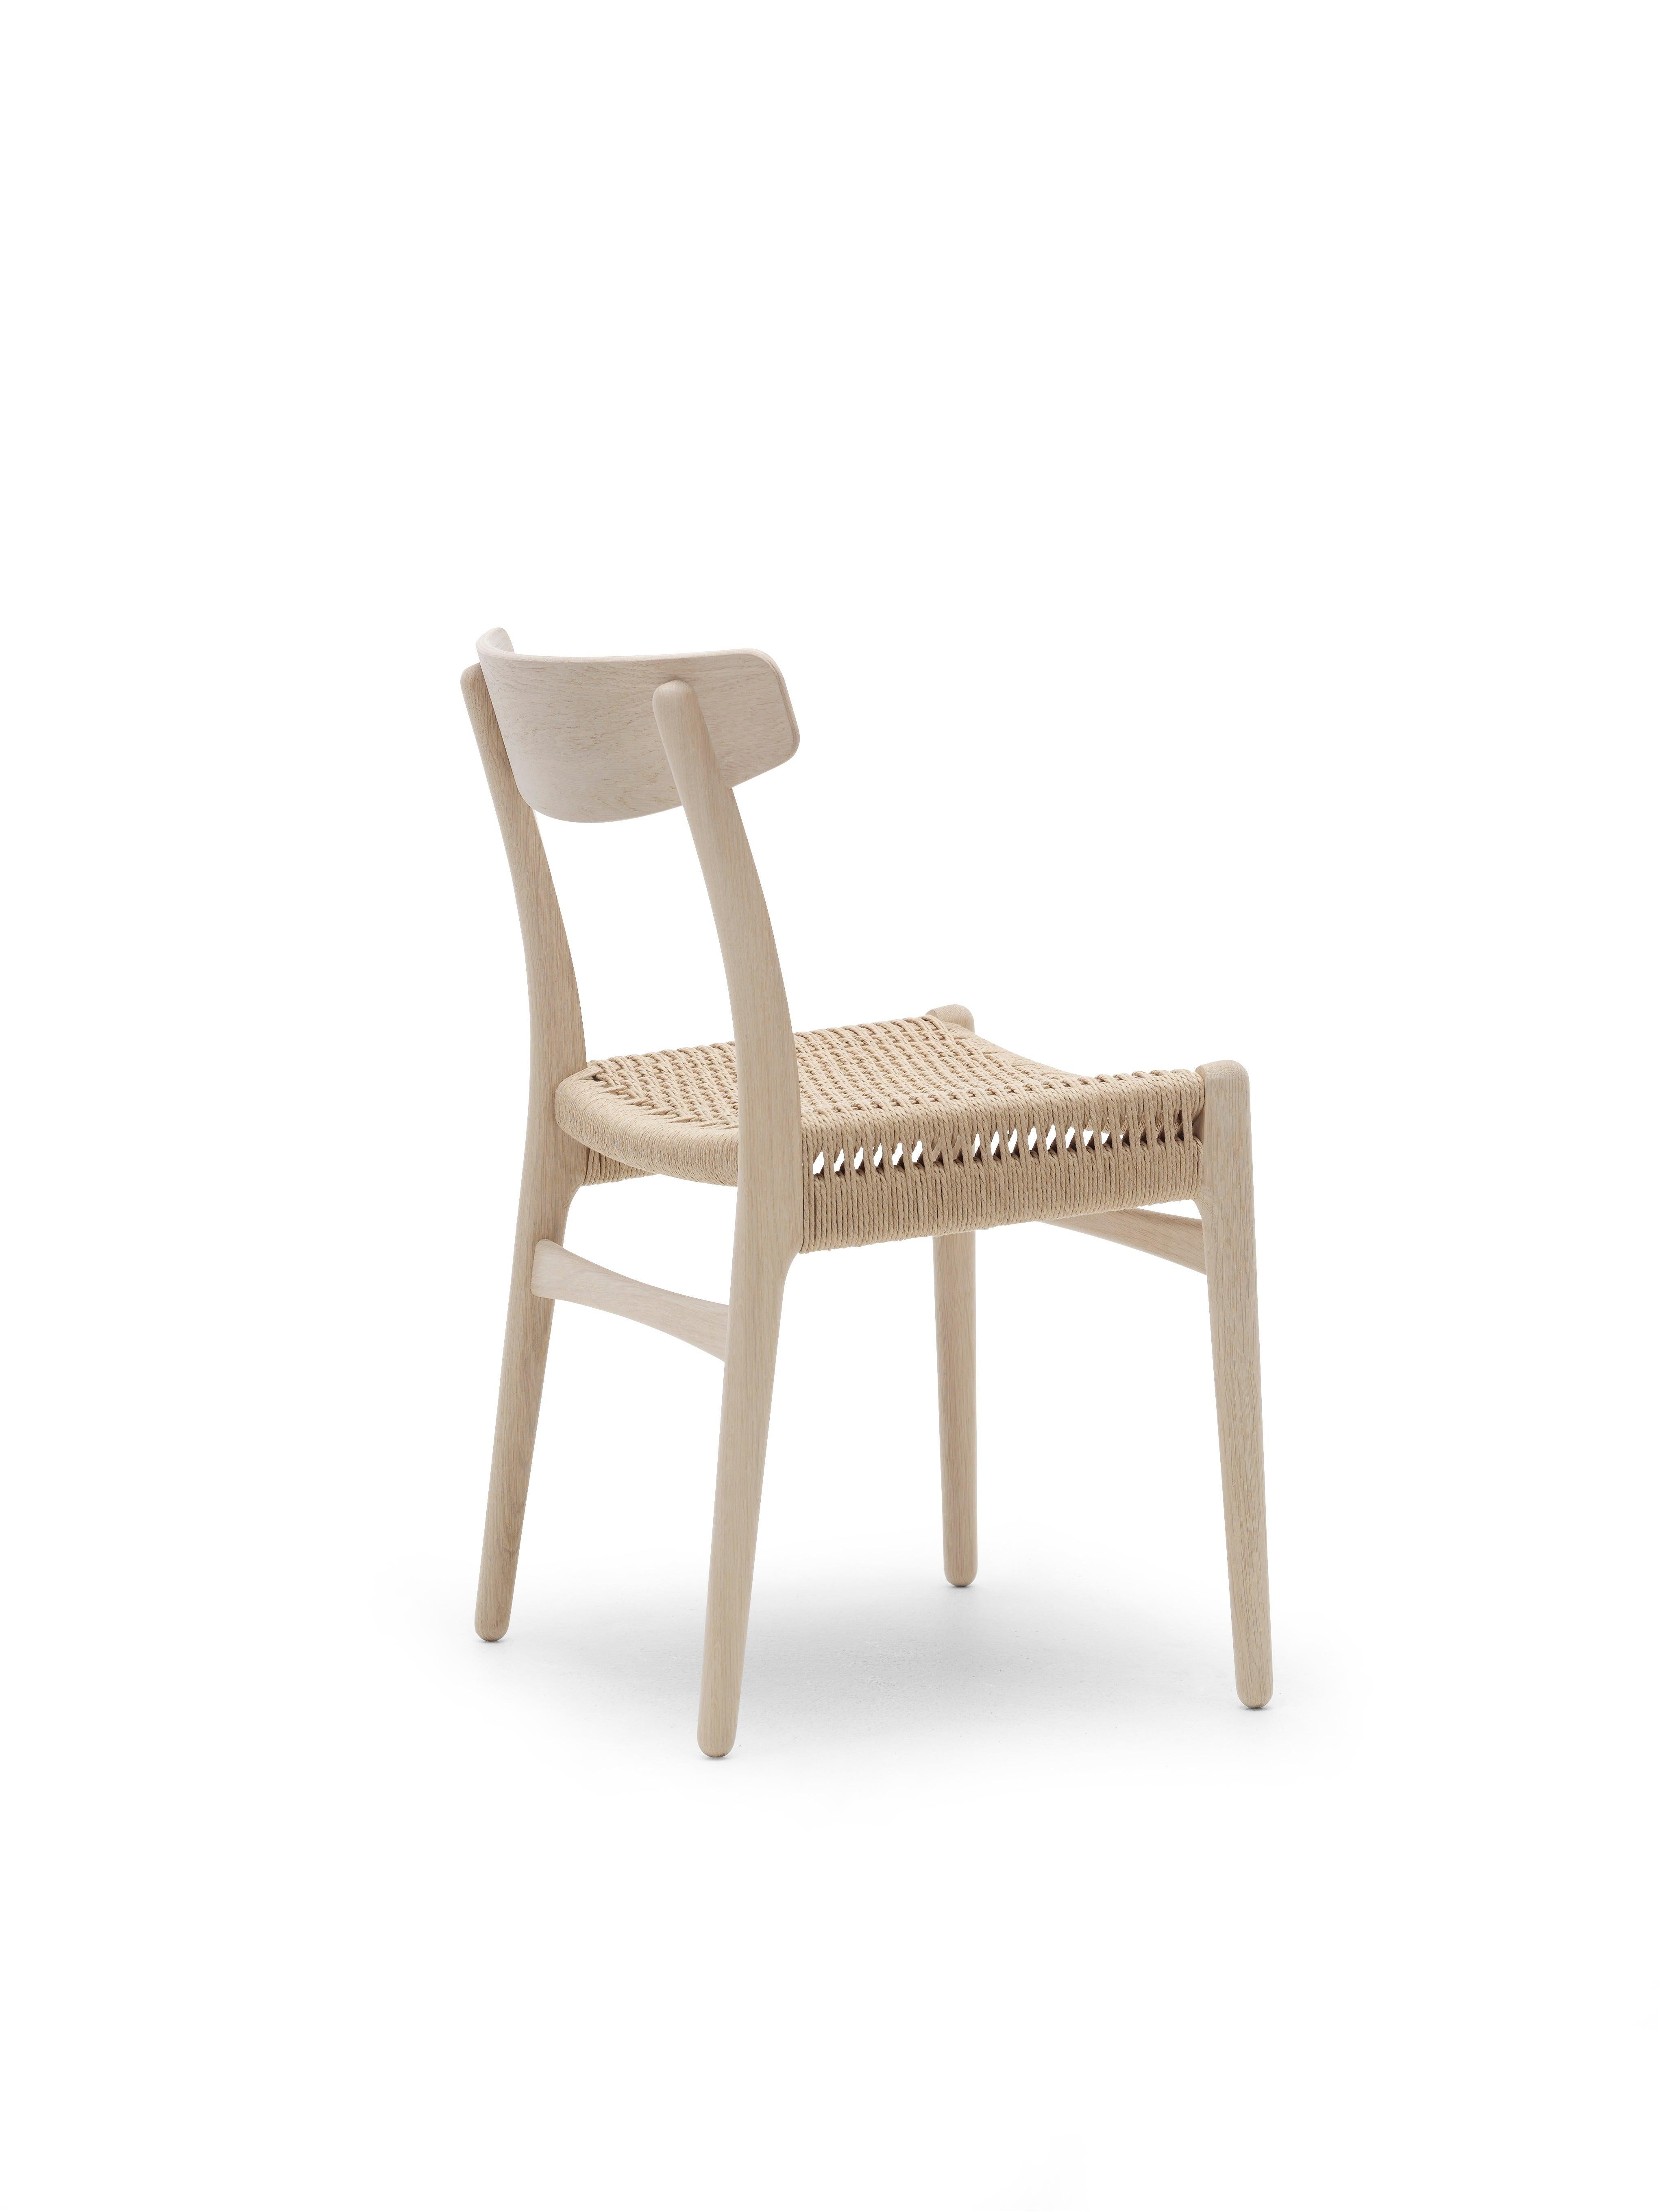 Modern CH23 Dining Chair in Oak Soap with Natural Papercord Seat by Hans J. Wegner